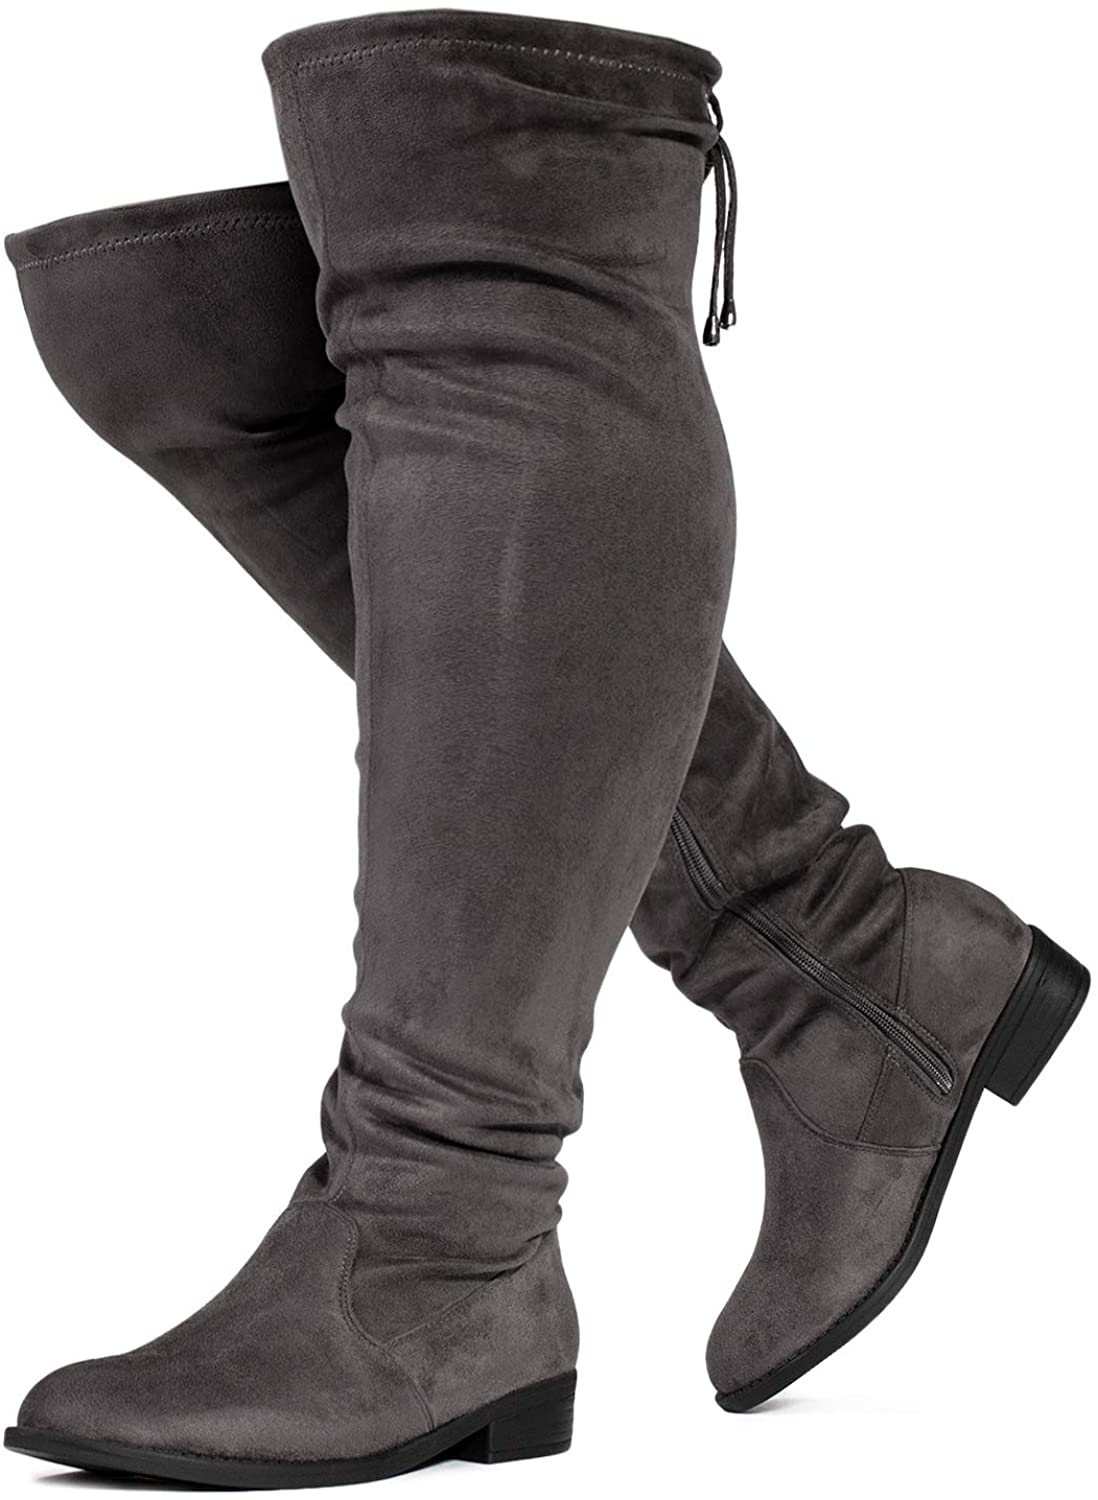 Women's Tokyo Stretchy Over The Knee Boots Wide Calf 